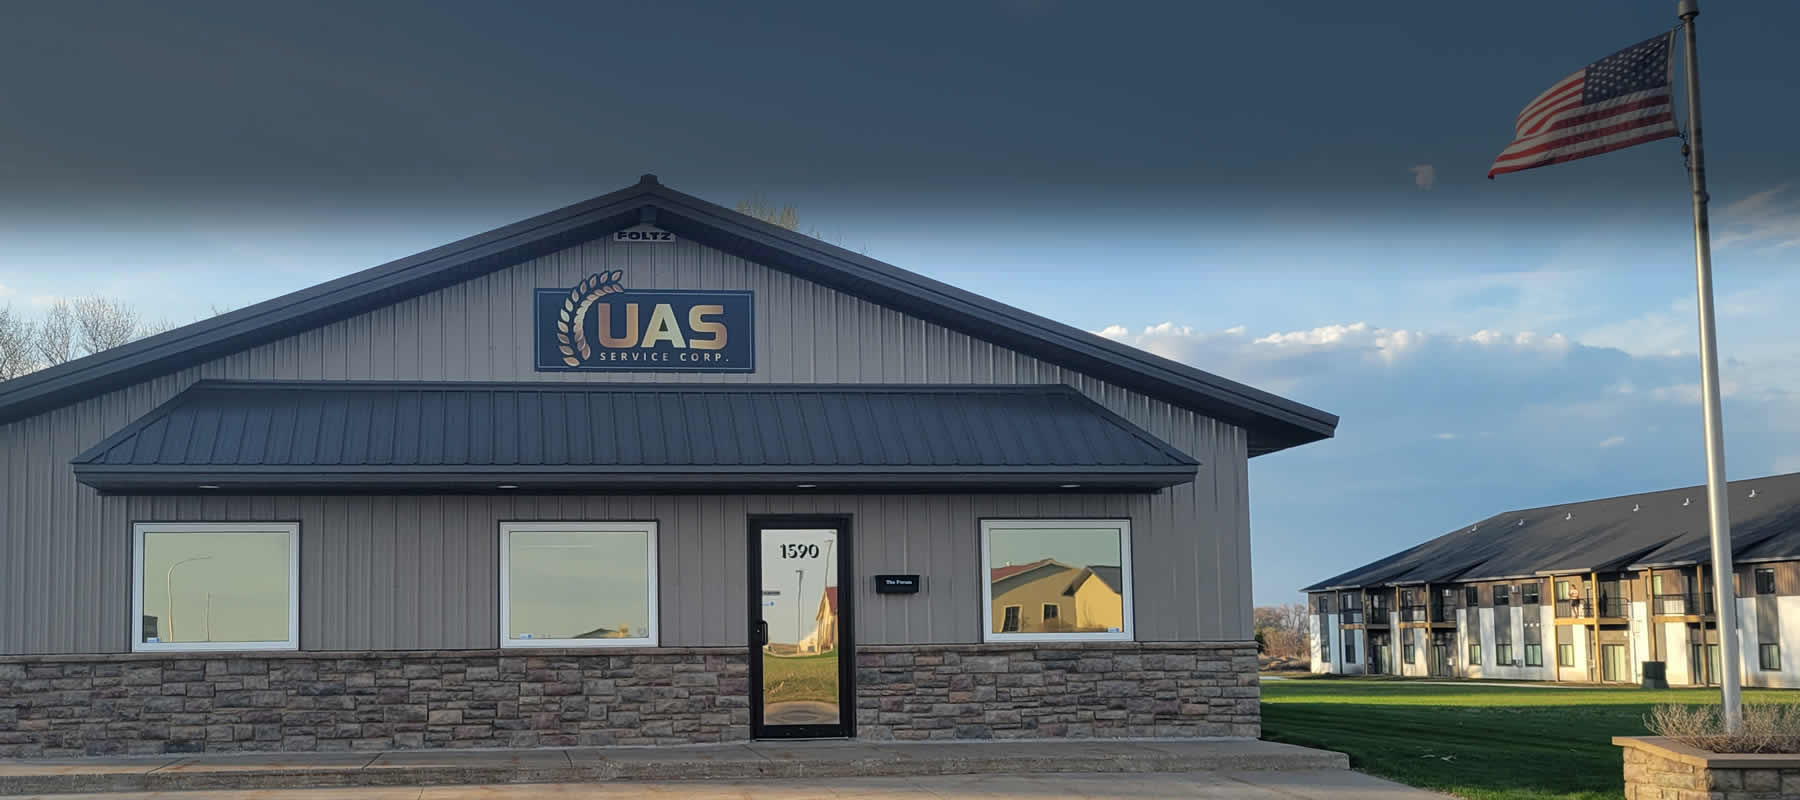 Purchase a DICKEY-john GAC 2700 Agri from UAS Service Corp.